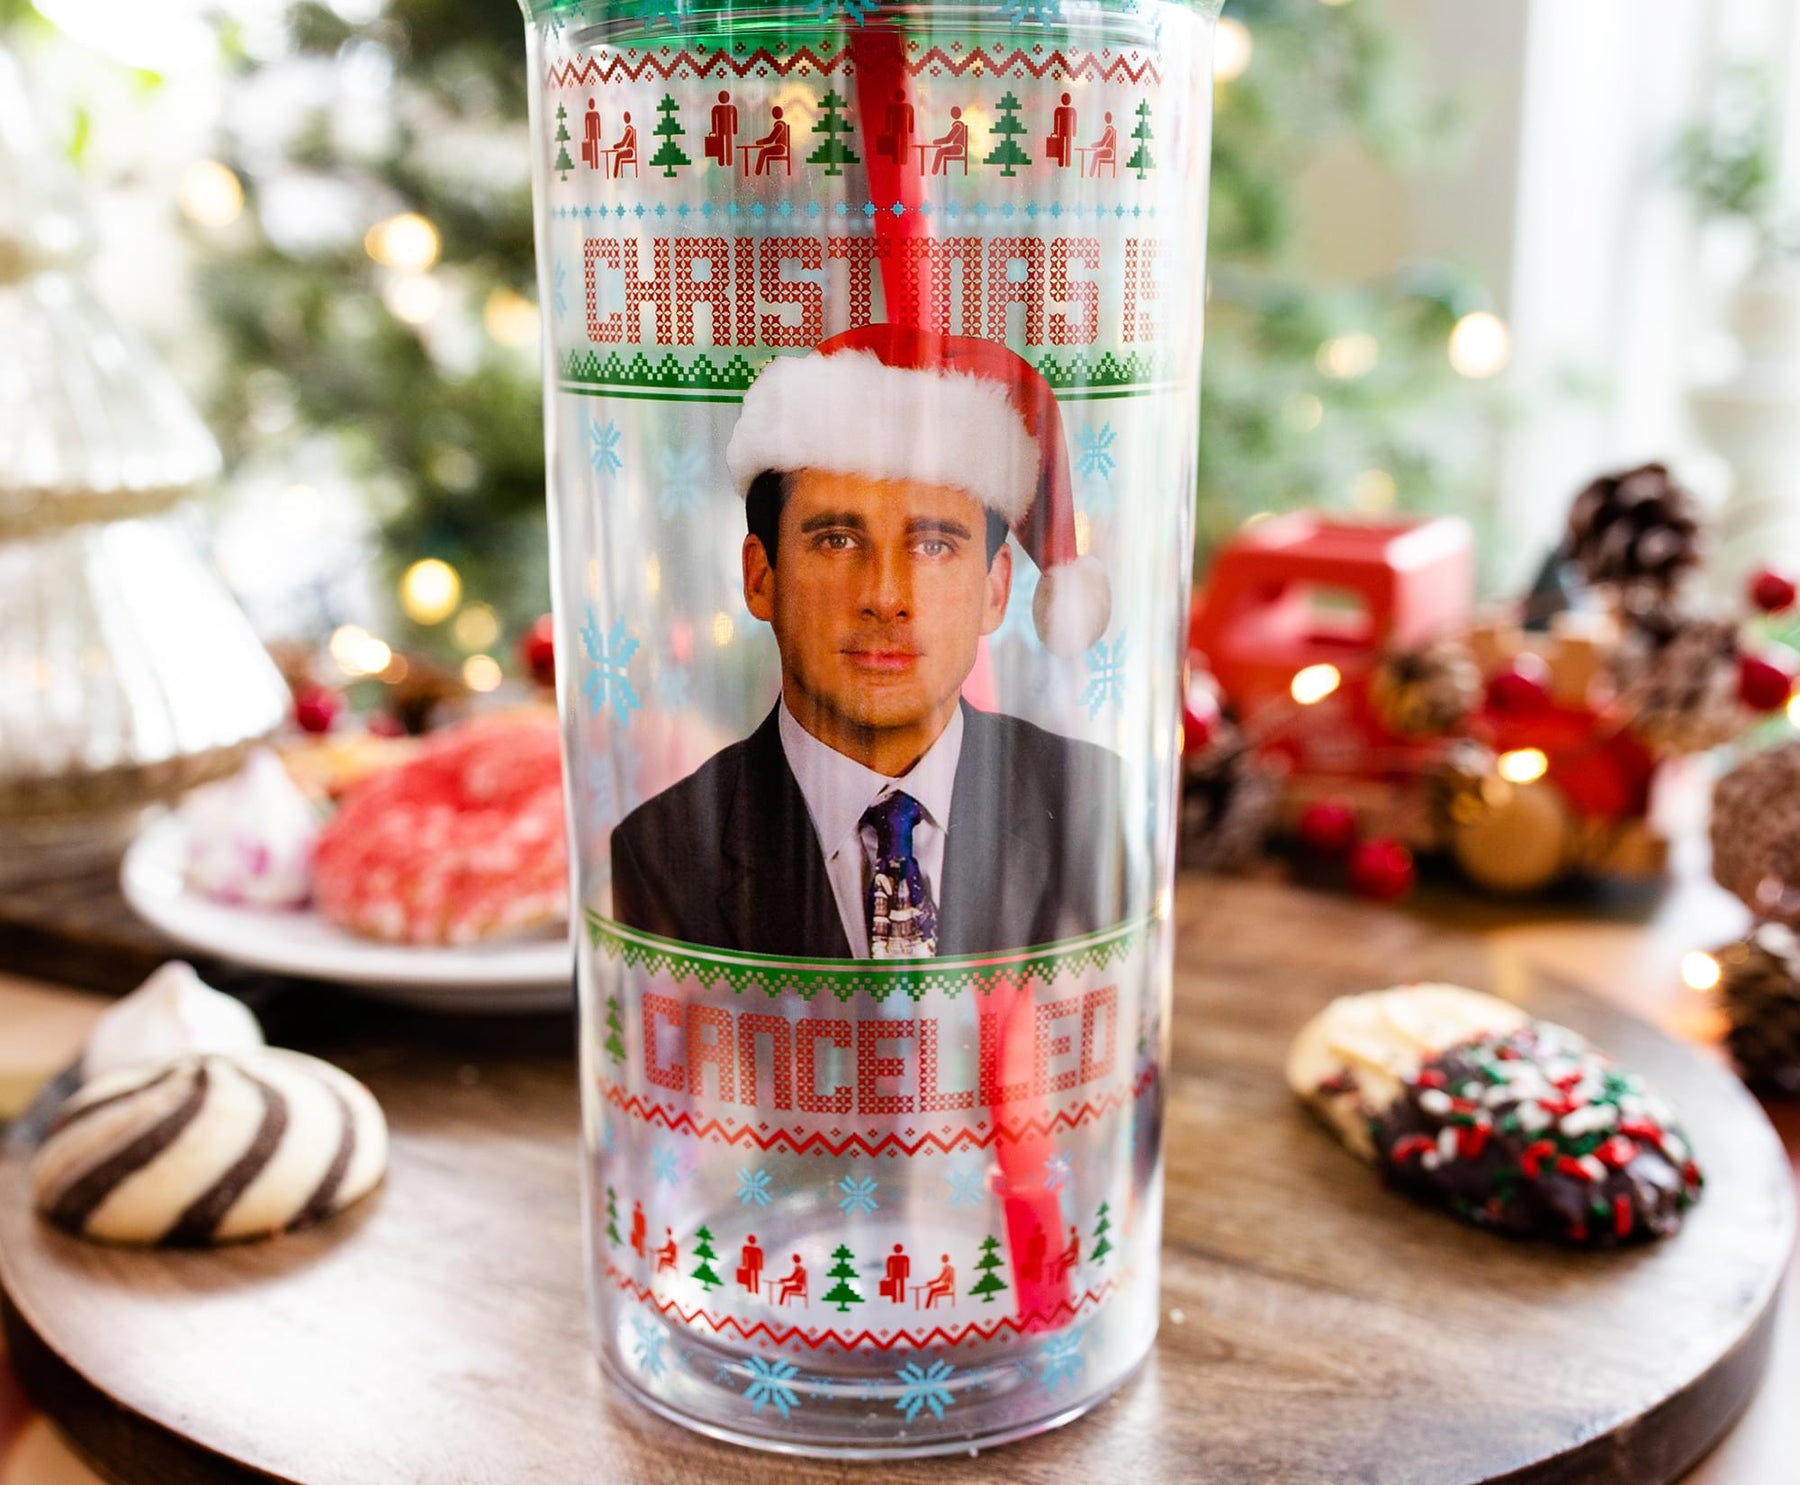 The Office "Christmas Is Cancelled" Carnival Cup With Lid and Straw | Holds 20 Ounces